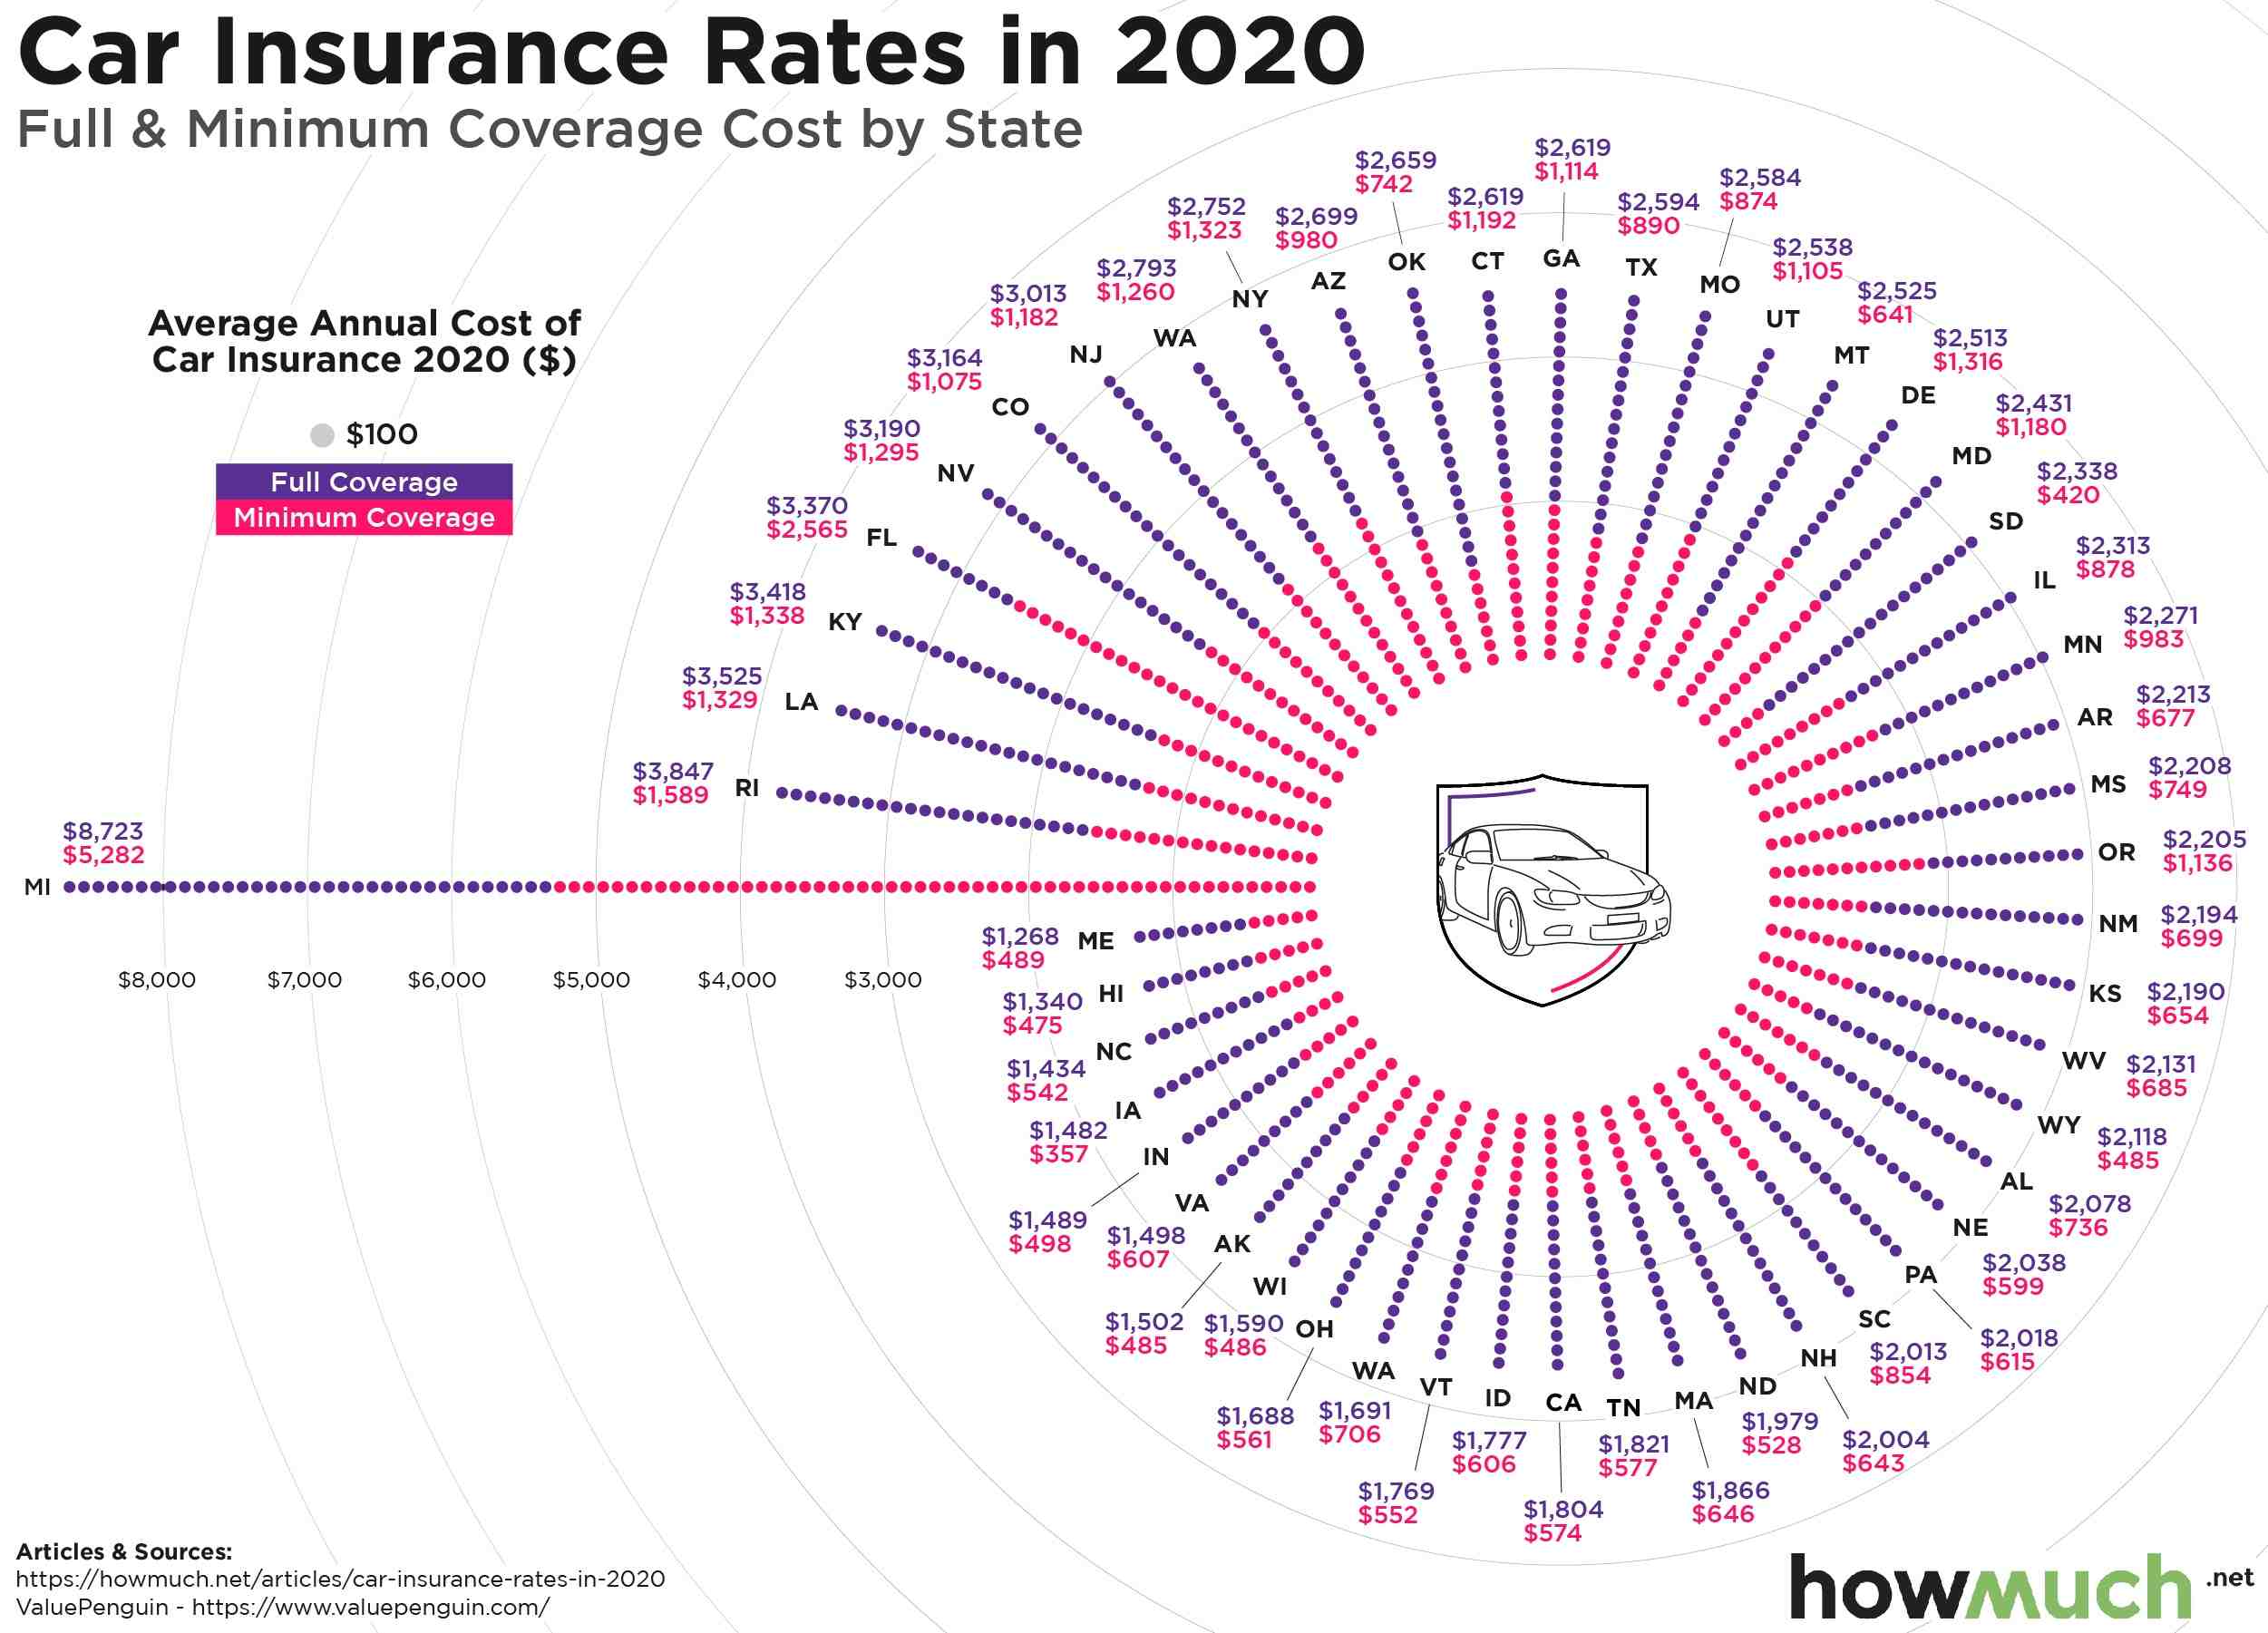 How much does Car Insurance cost per State?